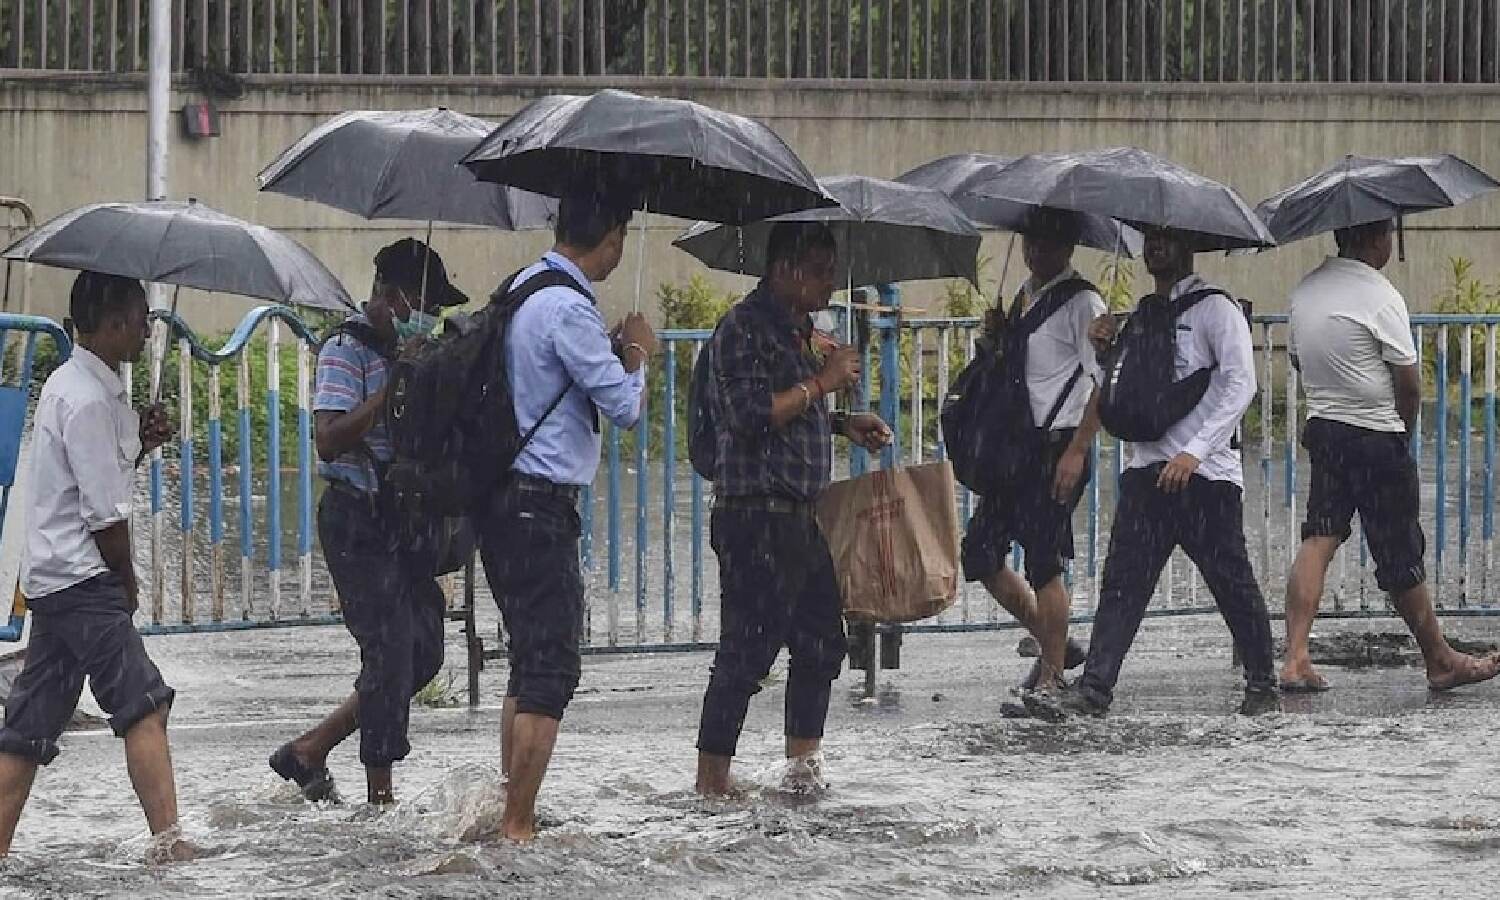 Weather Today: Heavy rain alert in Rajasthan and Chhattisgarh today, weather will deteriorate in many states including UP